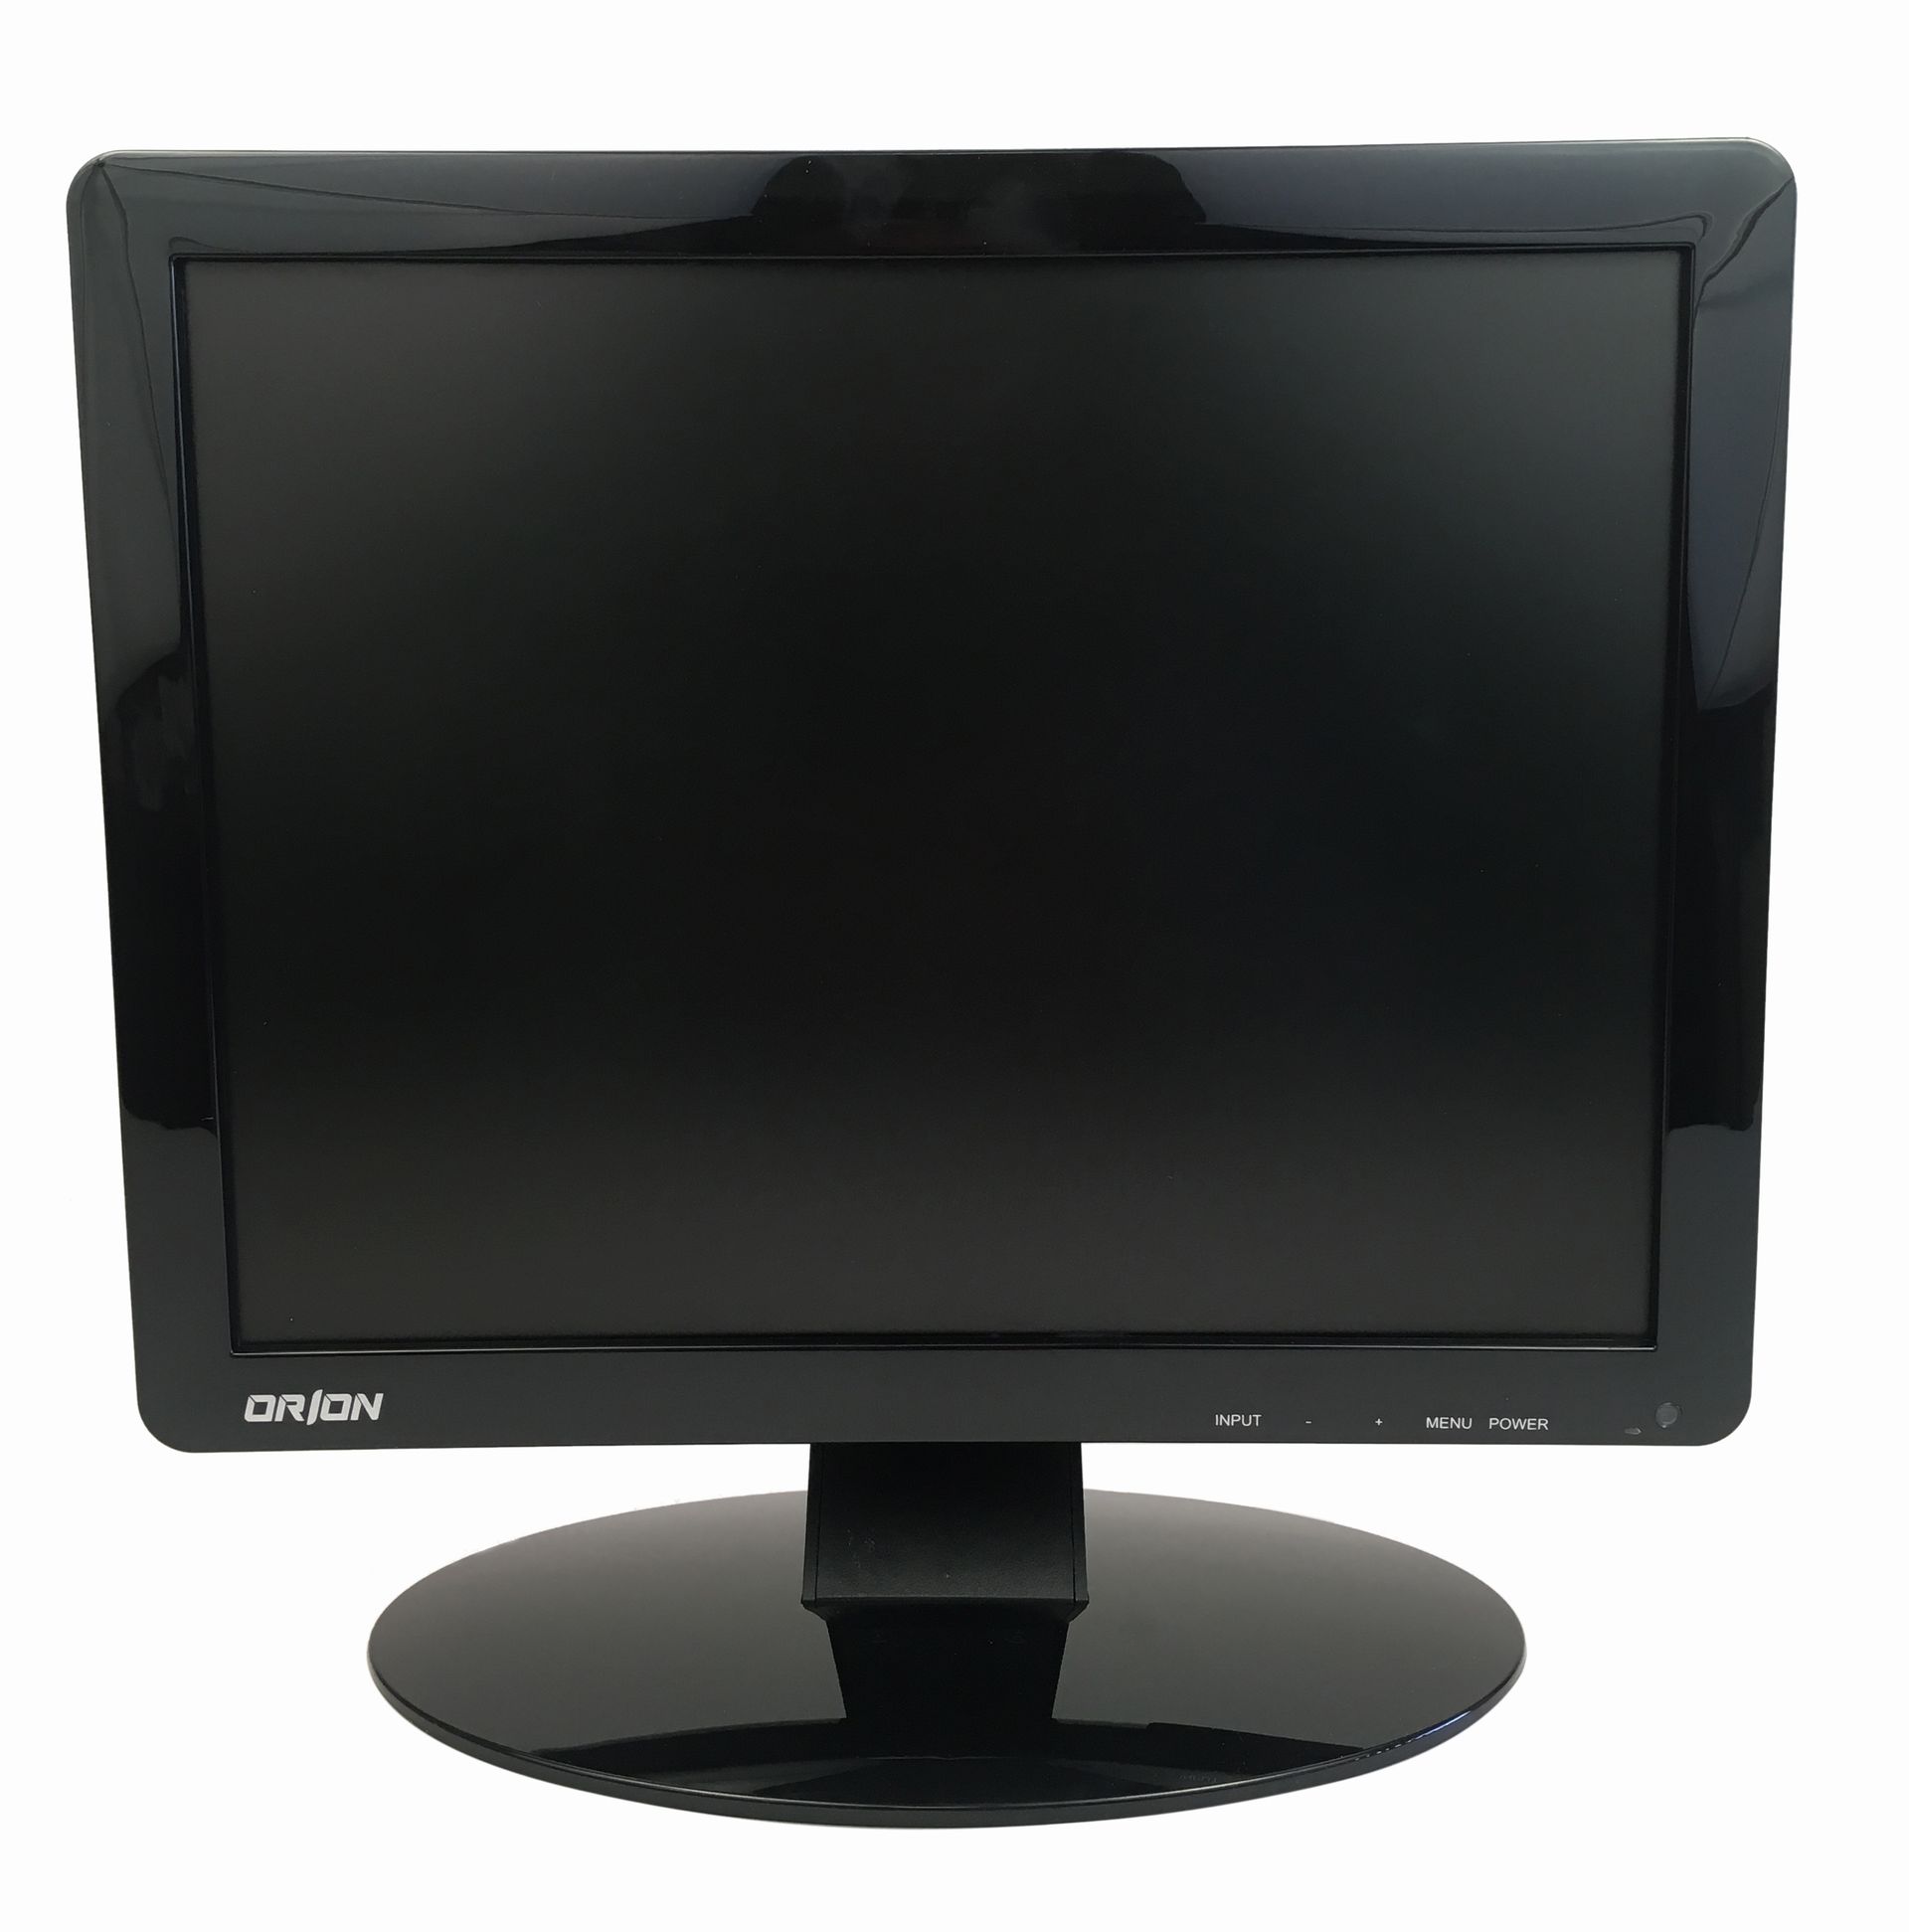 A black computer monitor with a white background